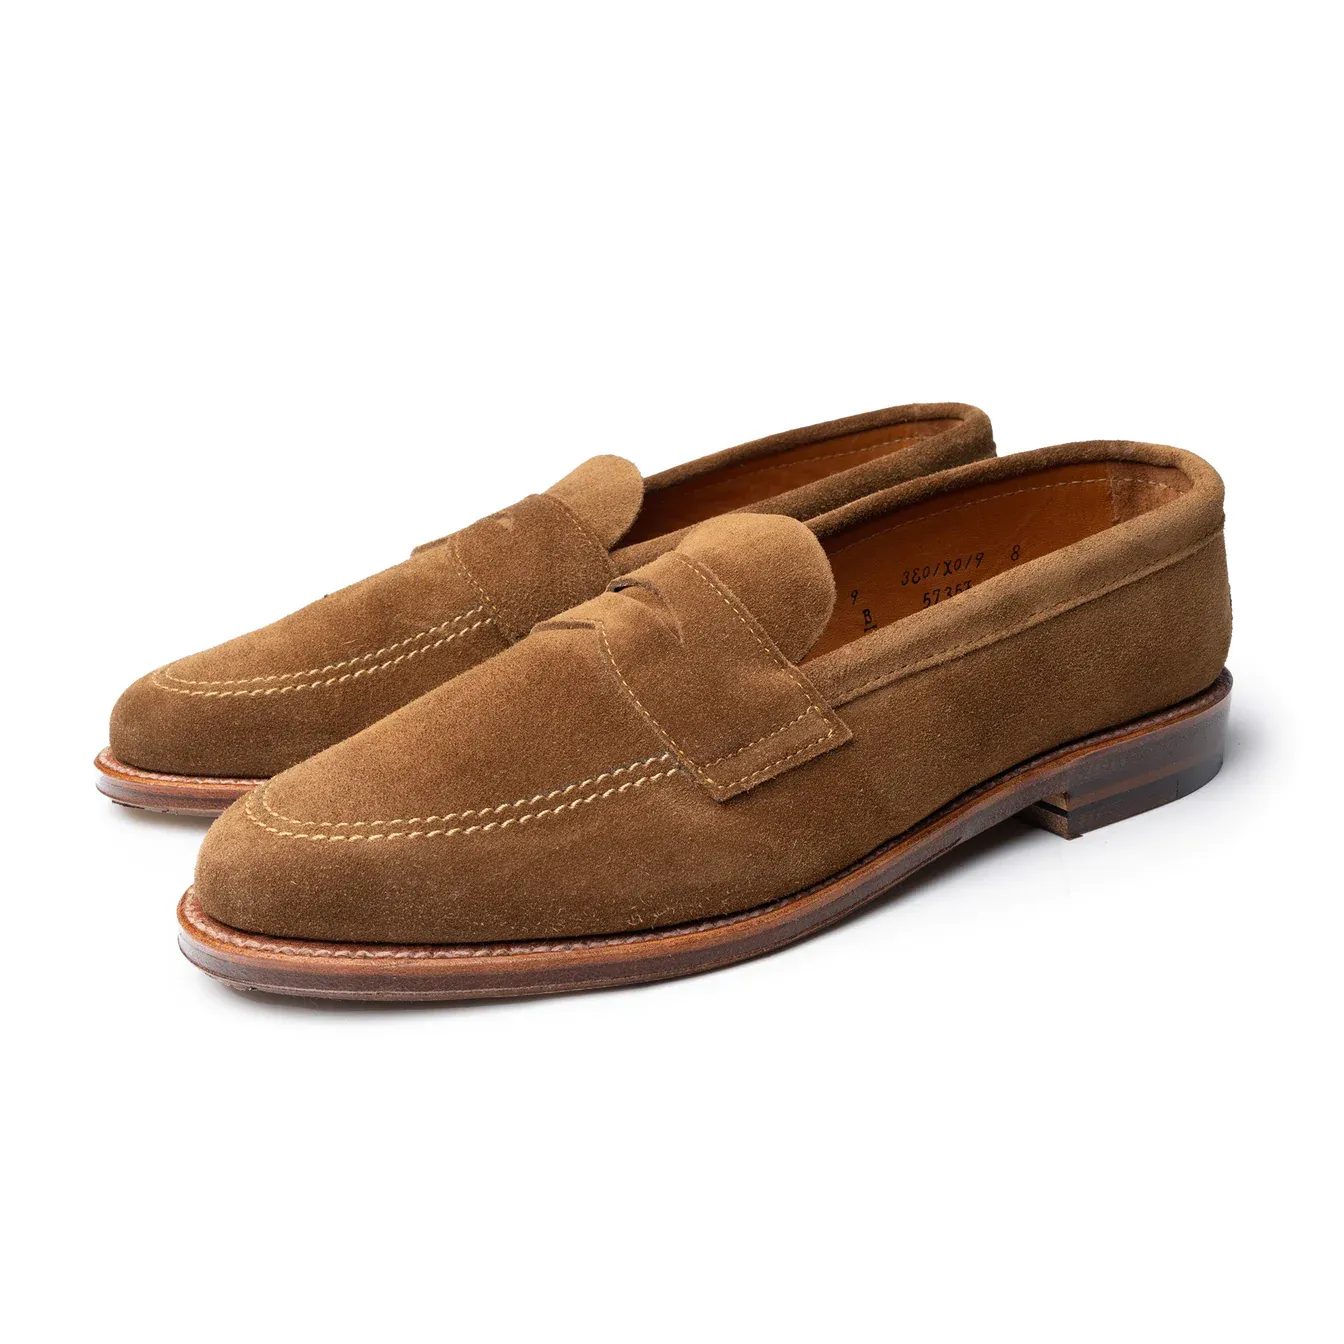 Loafers are a Cheat Code For the Stylish Man